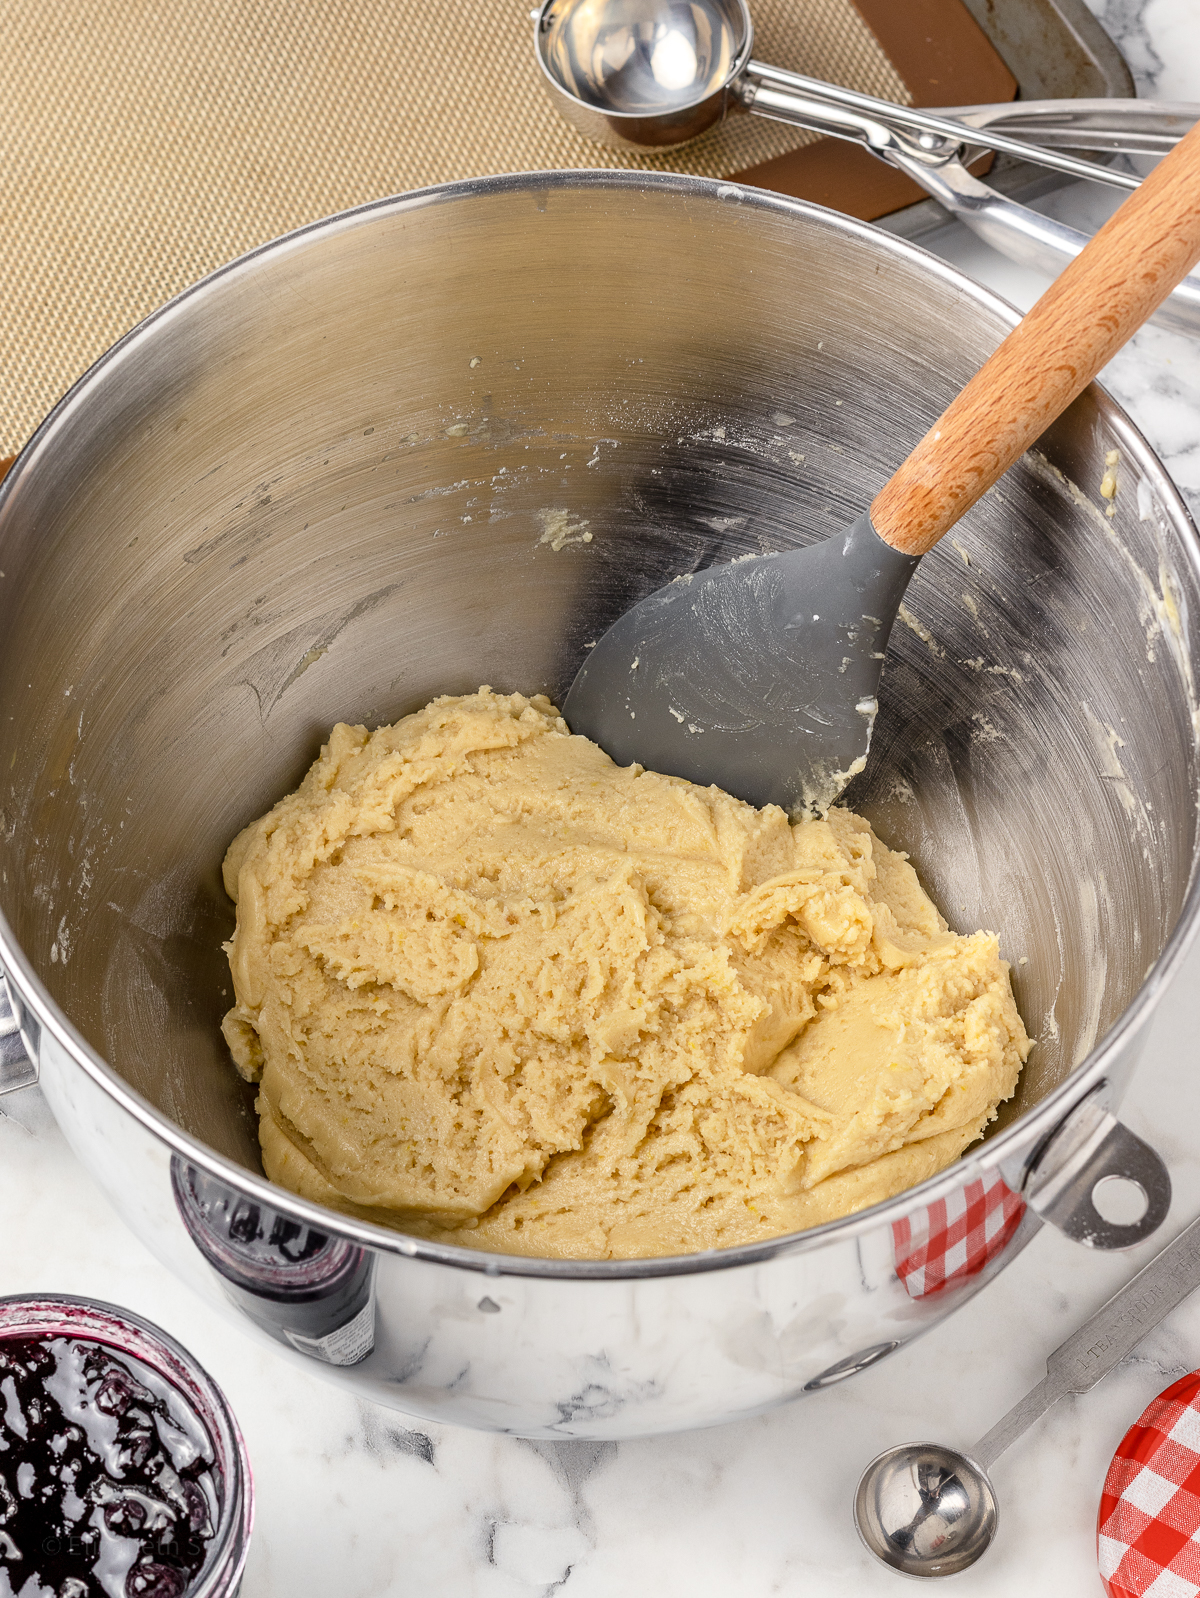 Lemon cookie dough mixed together in a mixing bowl, ready to chill in the refrigerator.